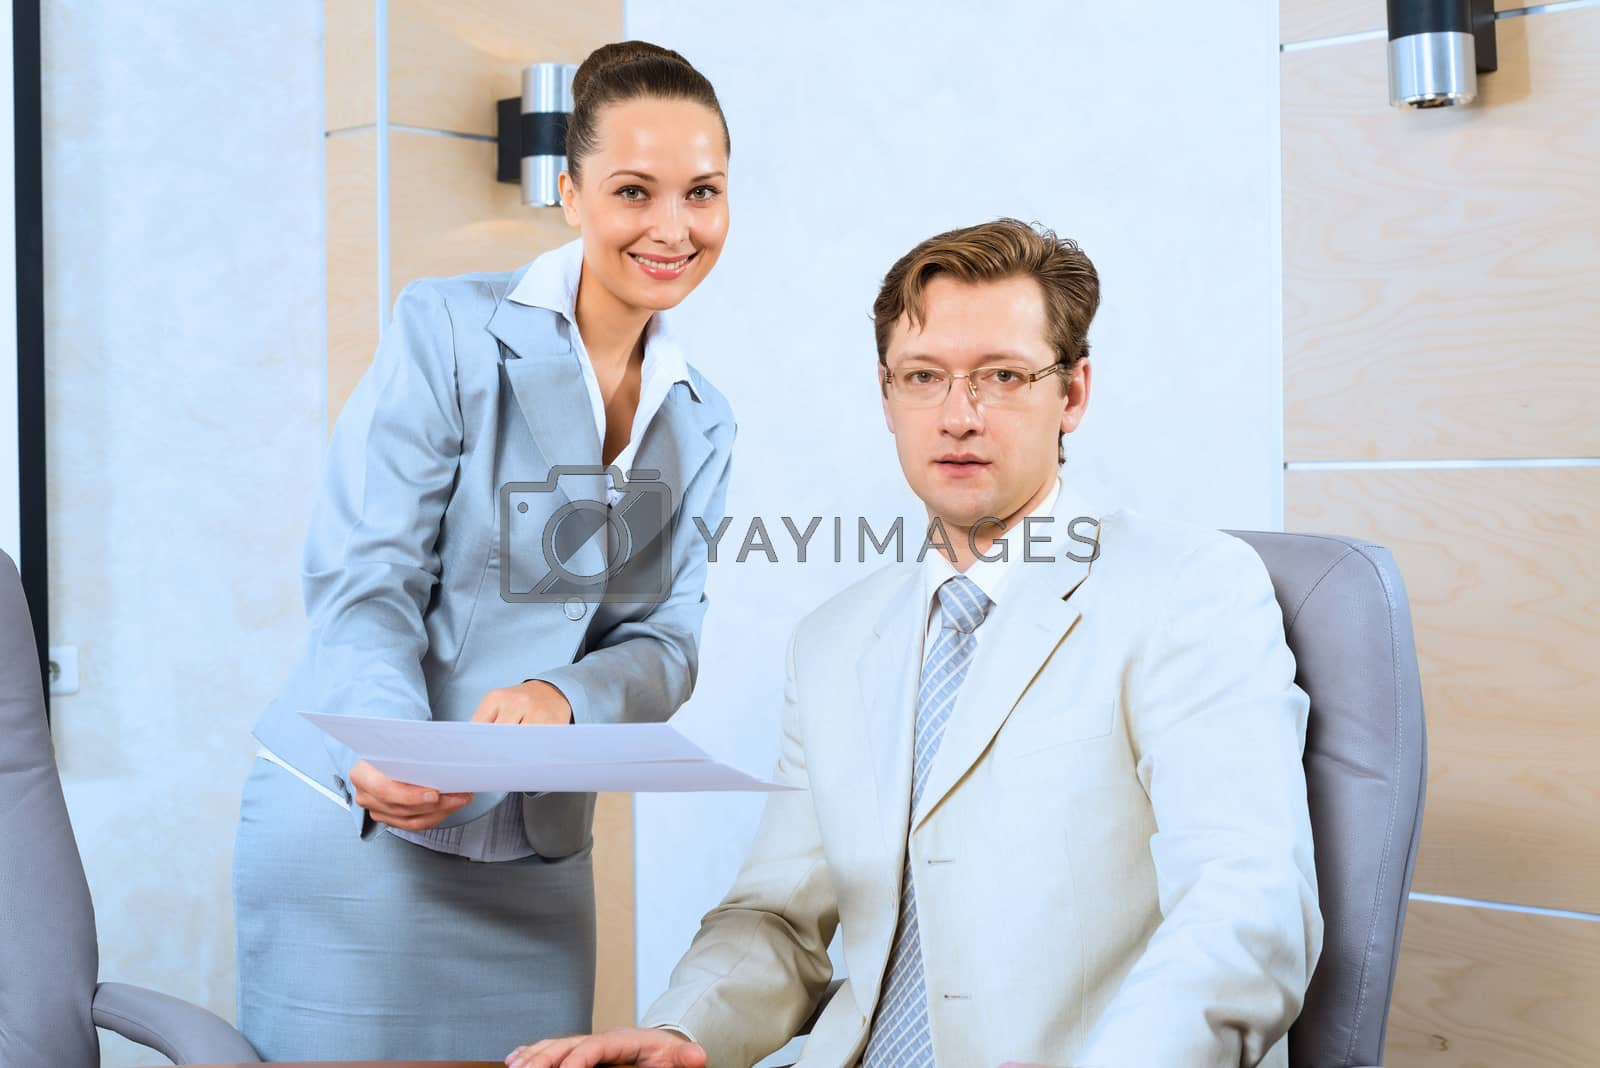 Royalty free image of two businessmen by adam121